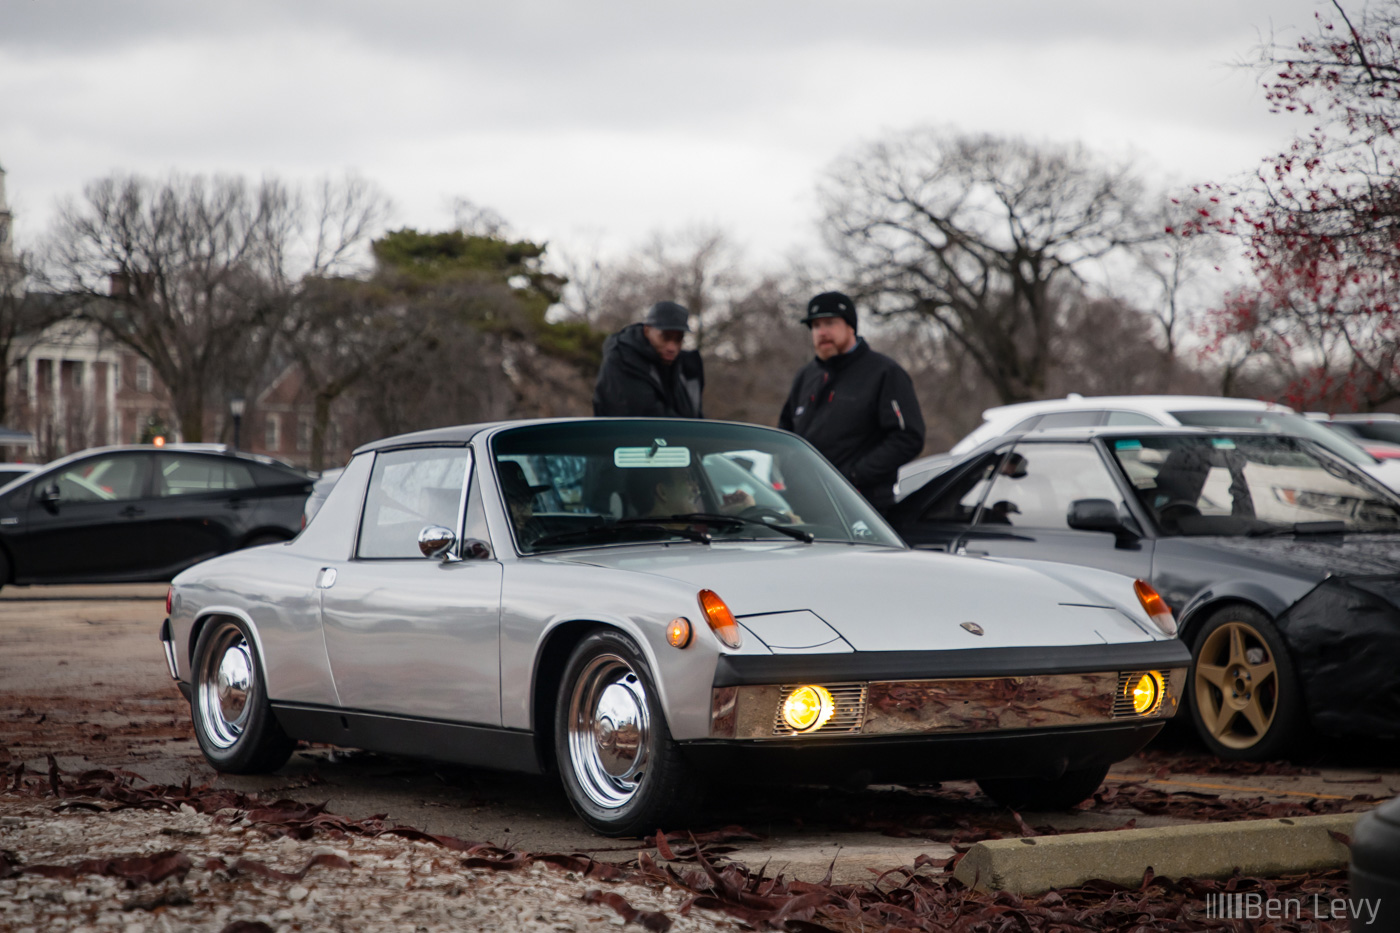 Silver Porsche 914 out on a cloudy day